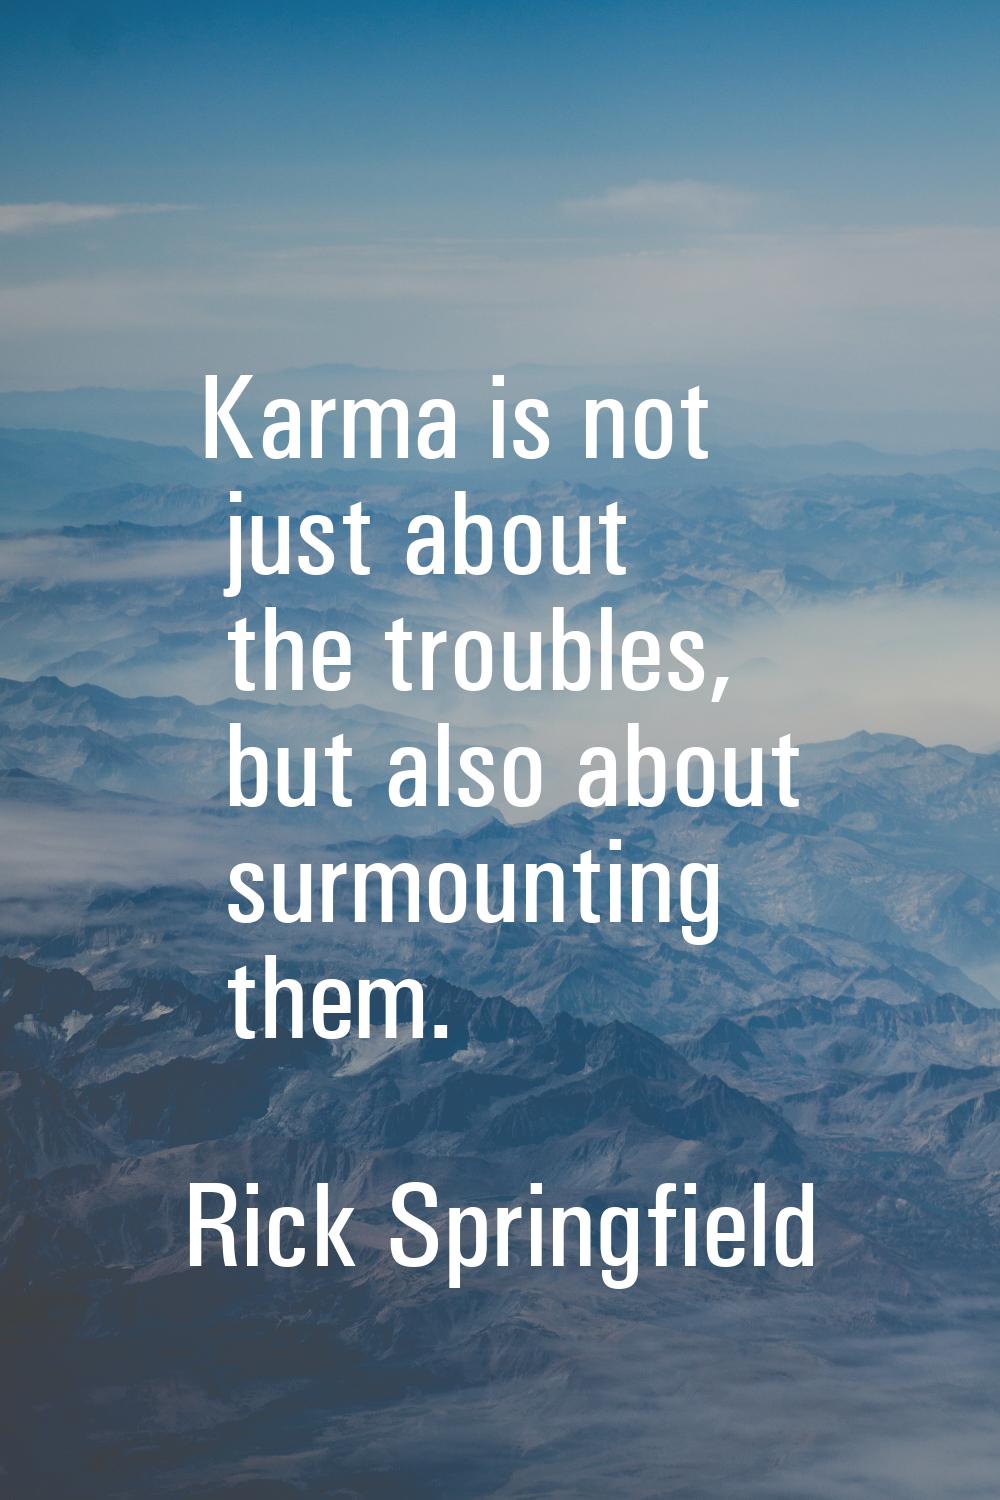 Karma is not just about the troubles, but also about surmounting them.